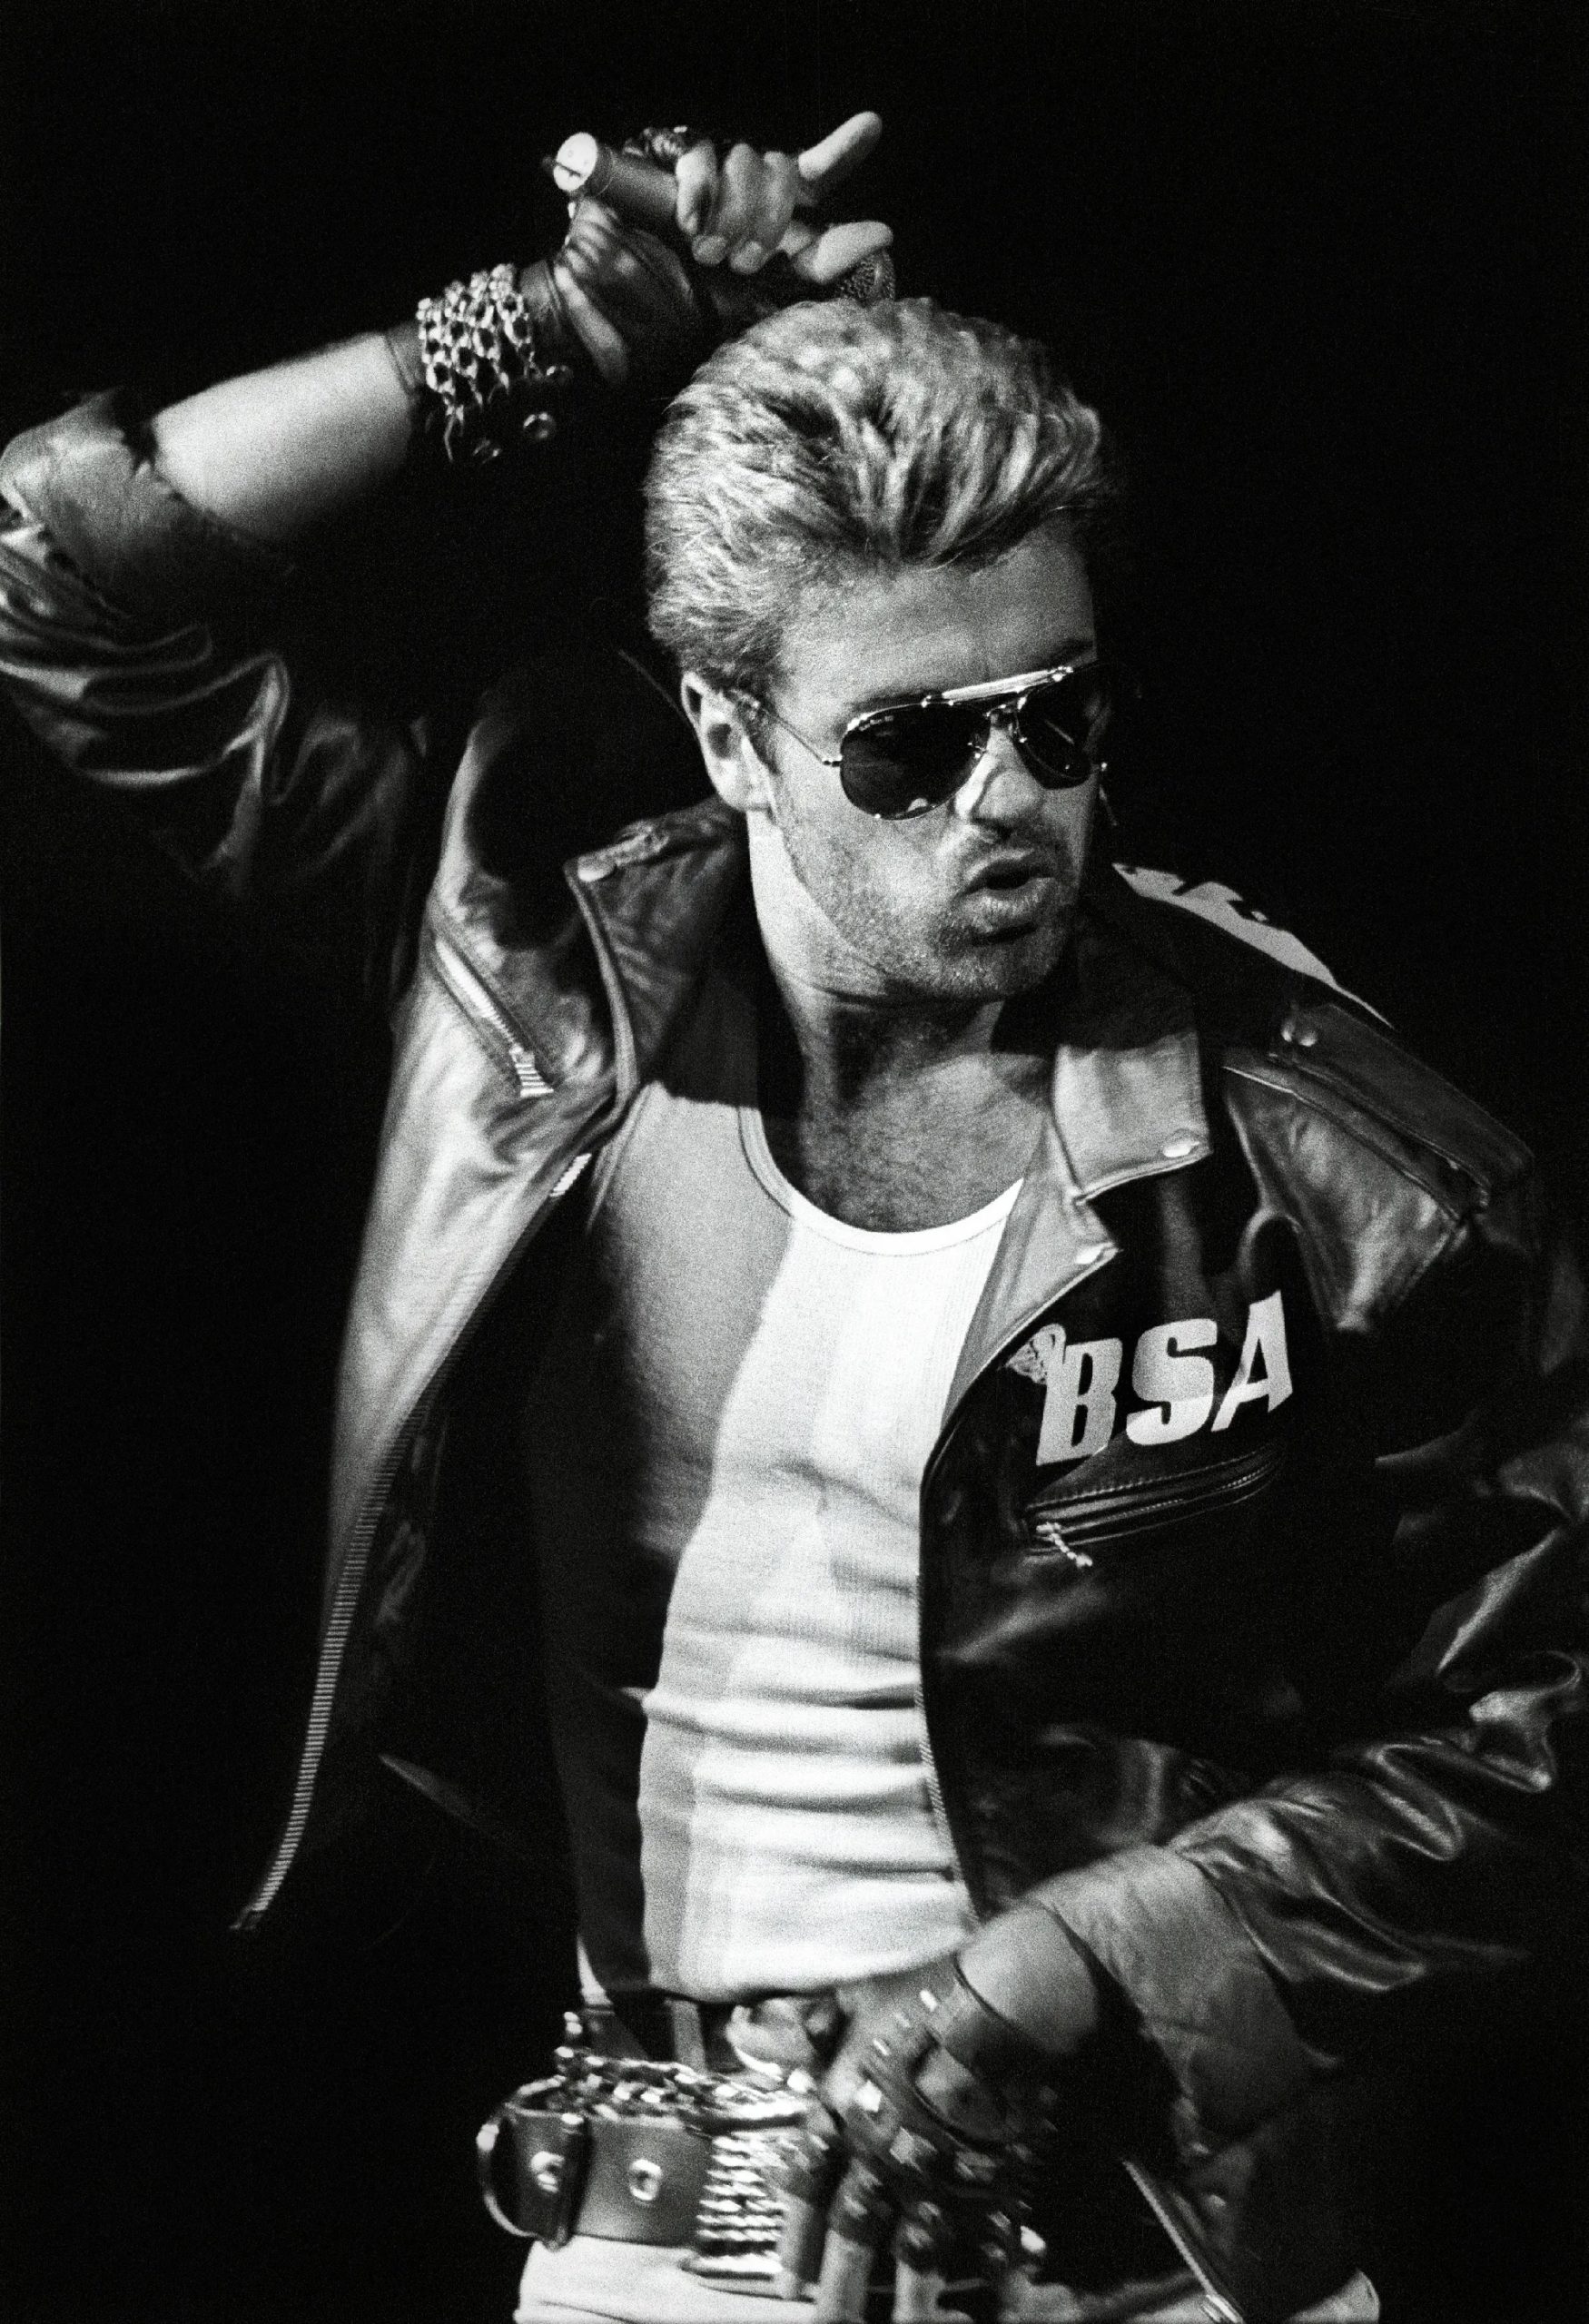 George Michael Birthday: Remembering The Musical Legend On His Birthday, Quotes, Pictures, Videos, Instagram, Twitter Posts To Wish Him